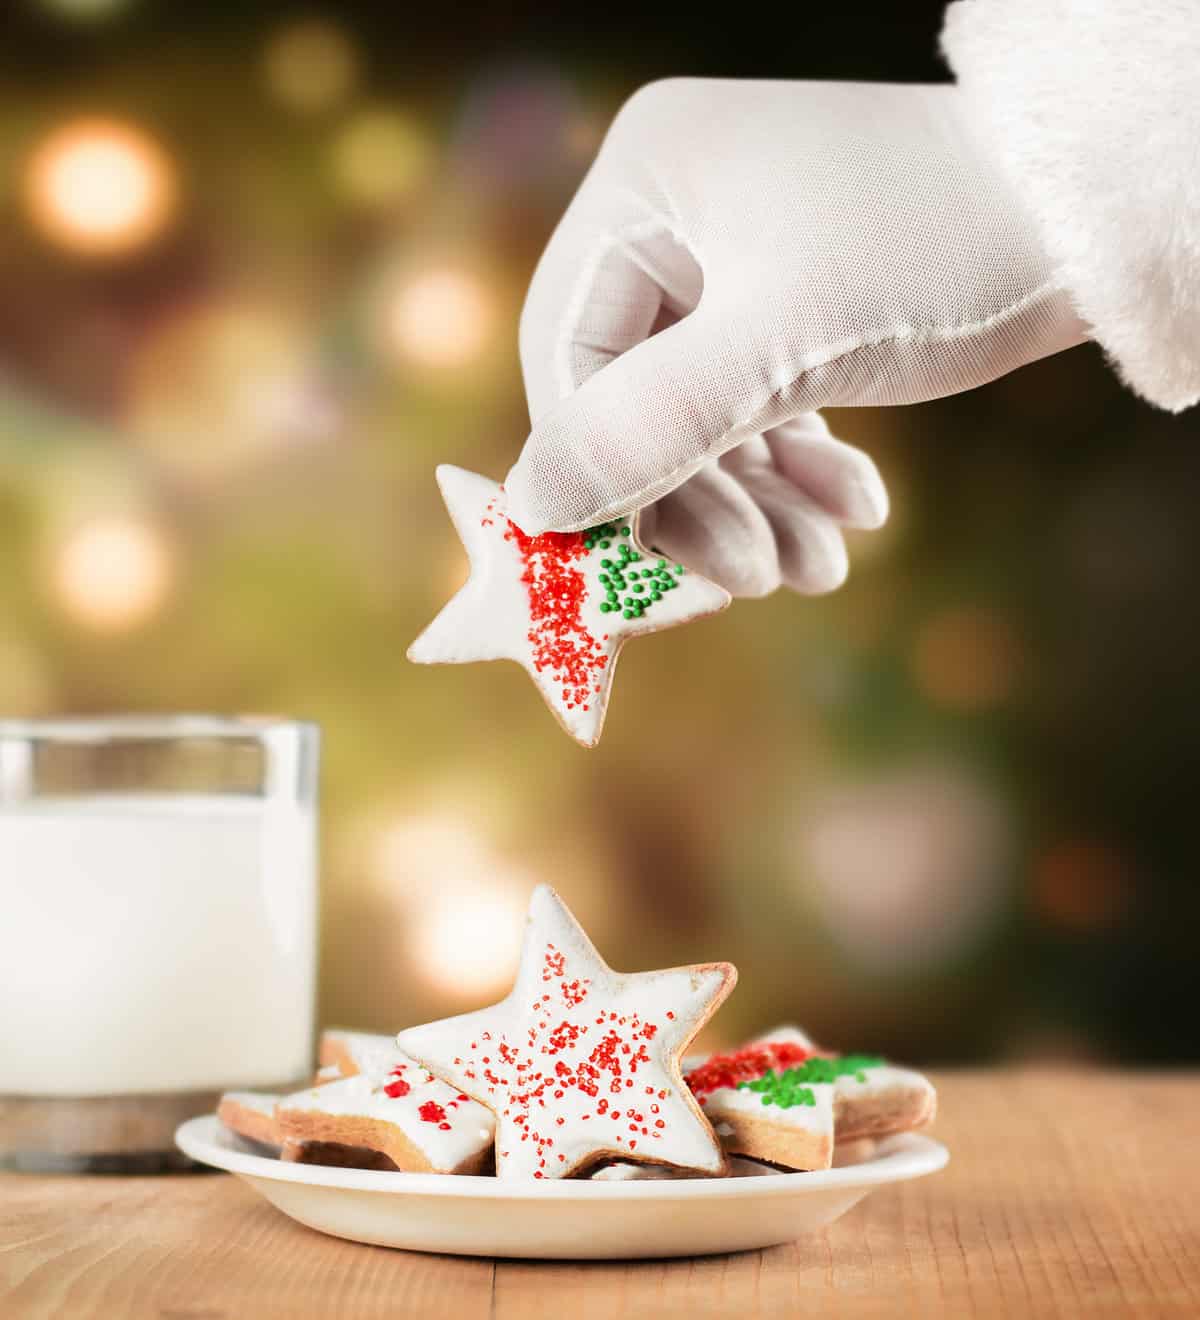 Santa taking a star shaped cookie, in front of a glass of milk and a Christmas tree.